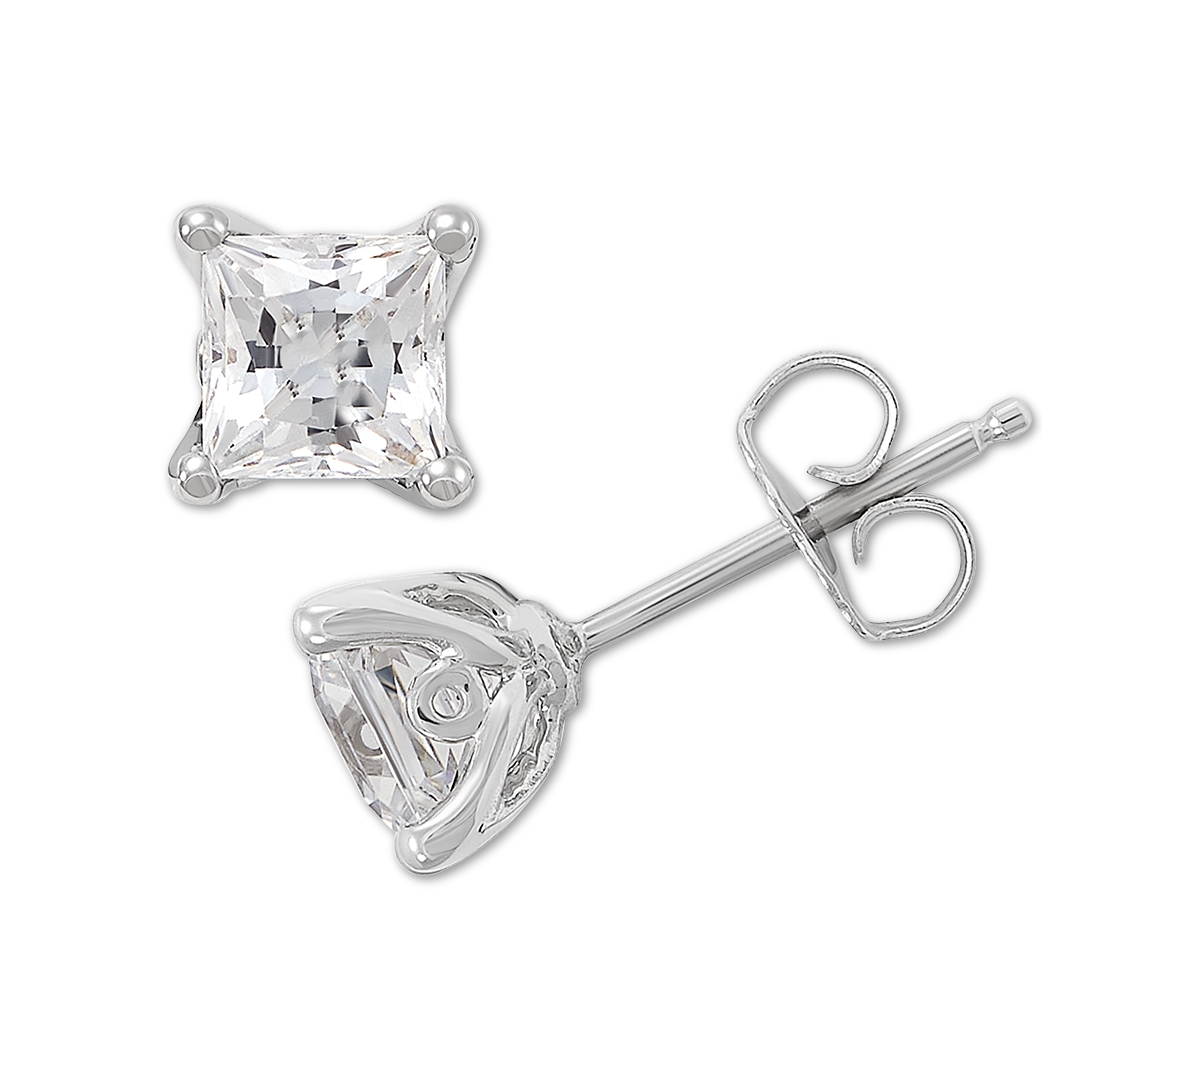 Grown With Love Igi Certified Lab Grown Diamond Princess Stud Earrings (1 ct. t.w.) in 14k White Gold or 14k Gold